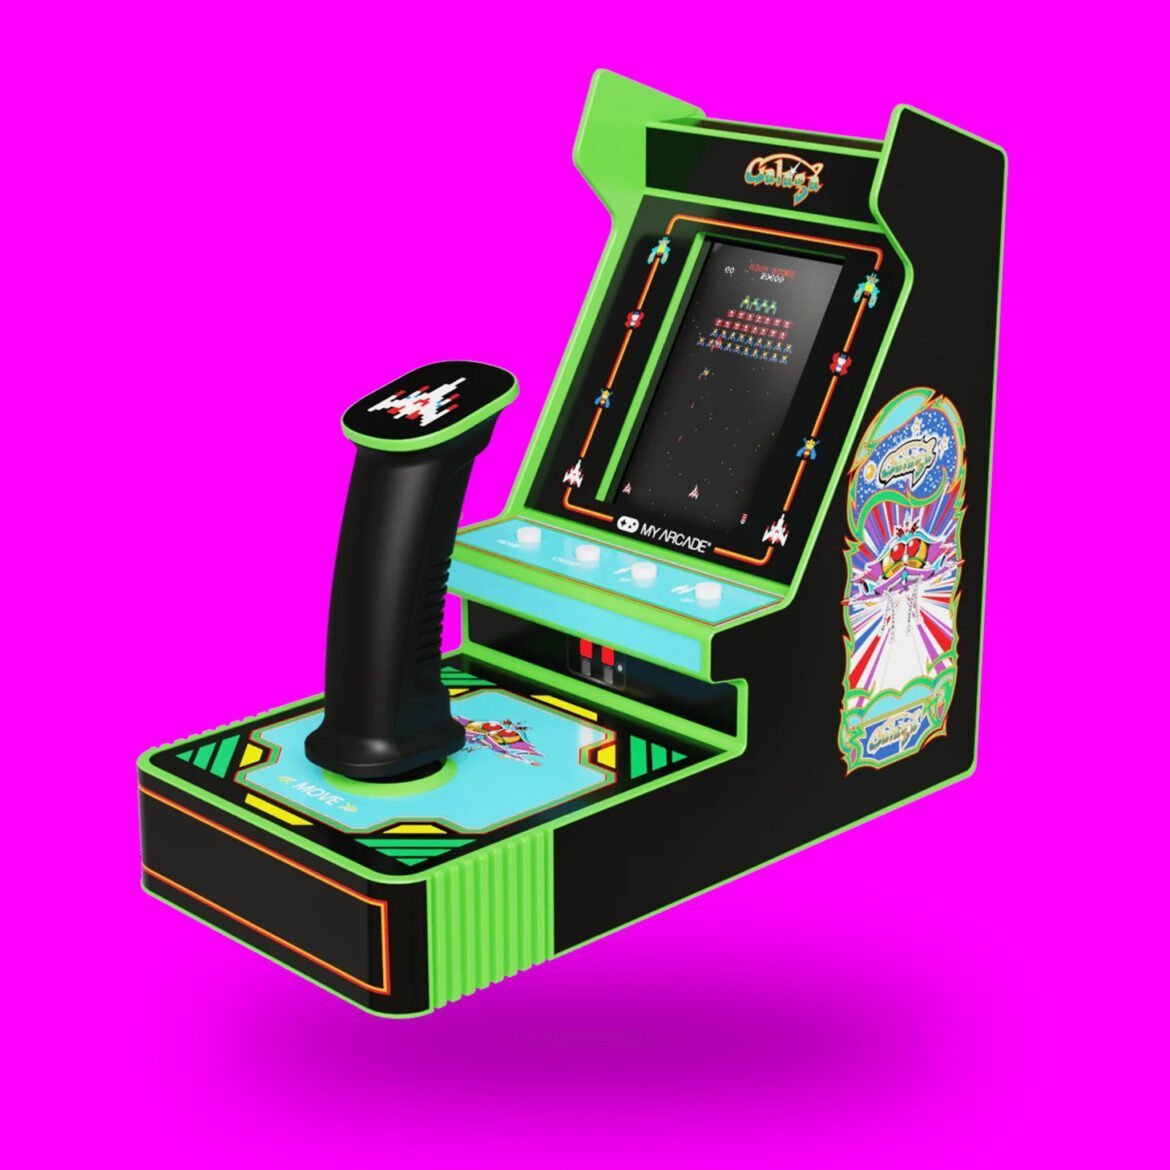 My Arcade’s Galaga Joystick Puts Nostalgia in the Palm of Your Hand